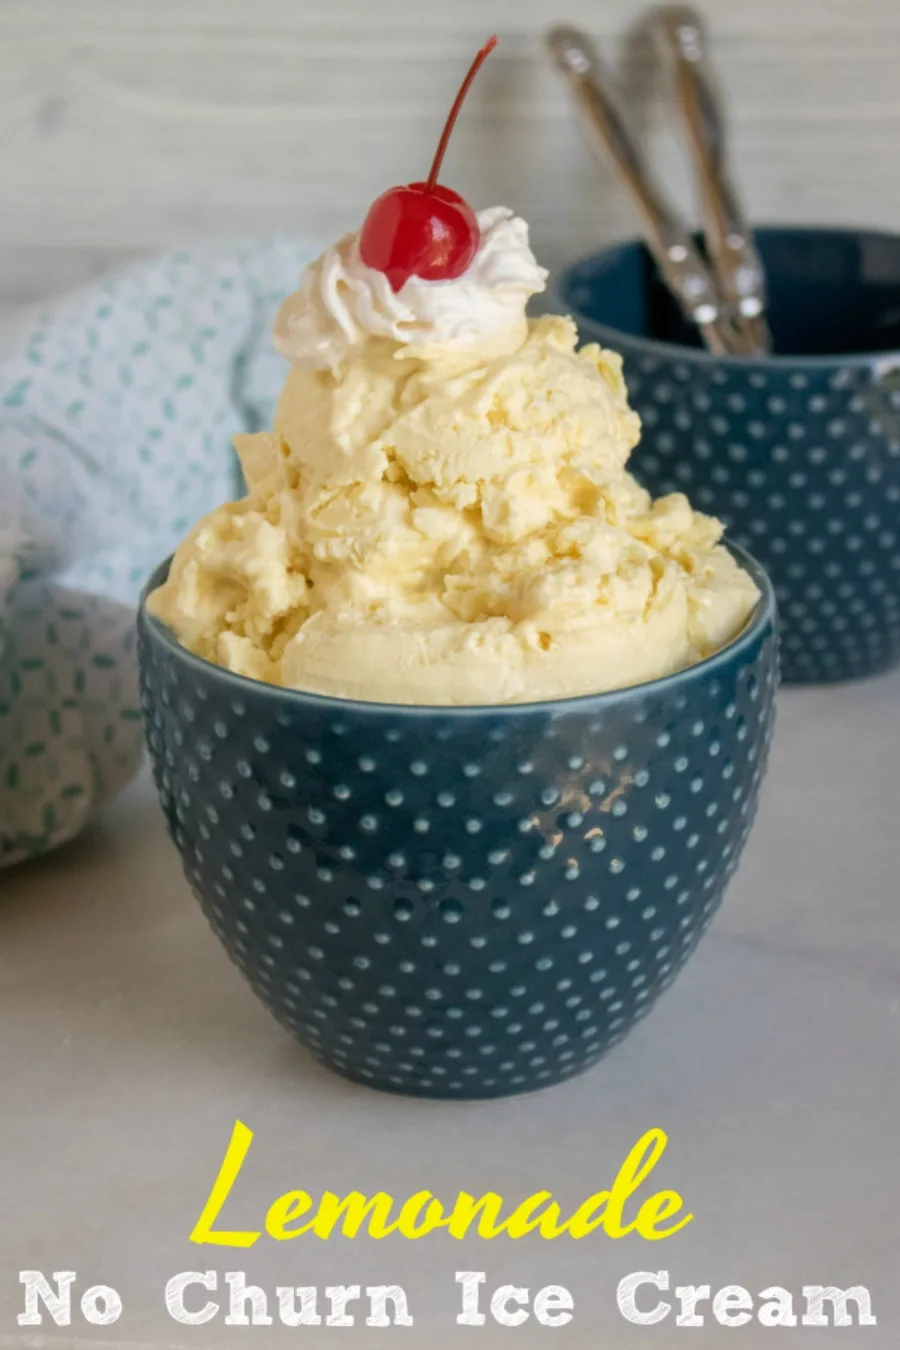 Creamy and cool, this lemonade no churn ice cream is simple to make and is the epitome of summer!